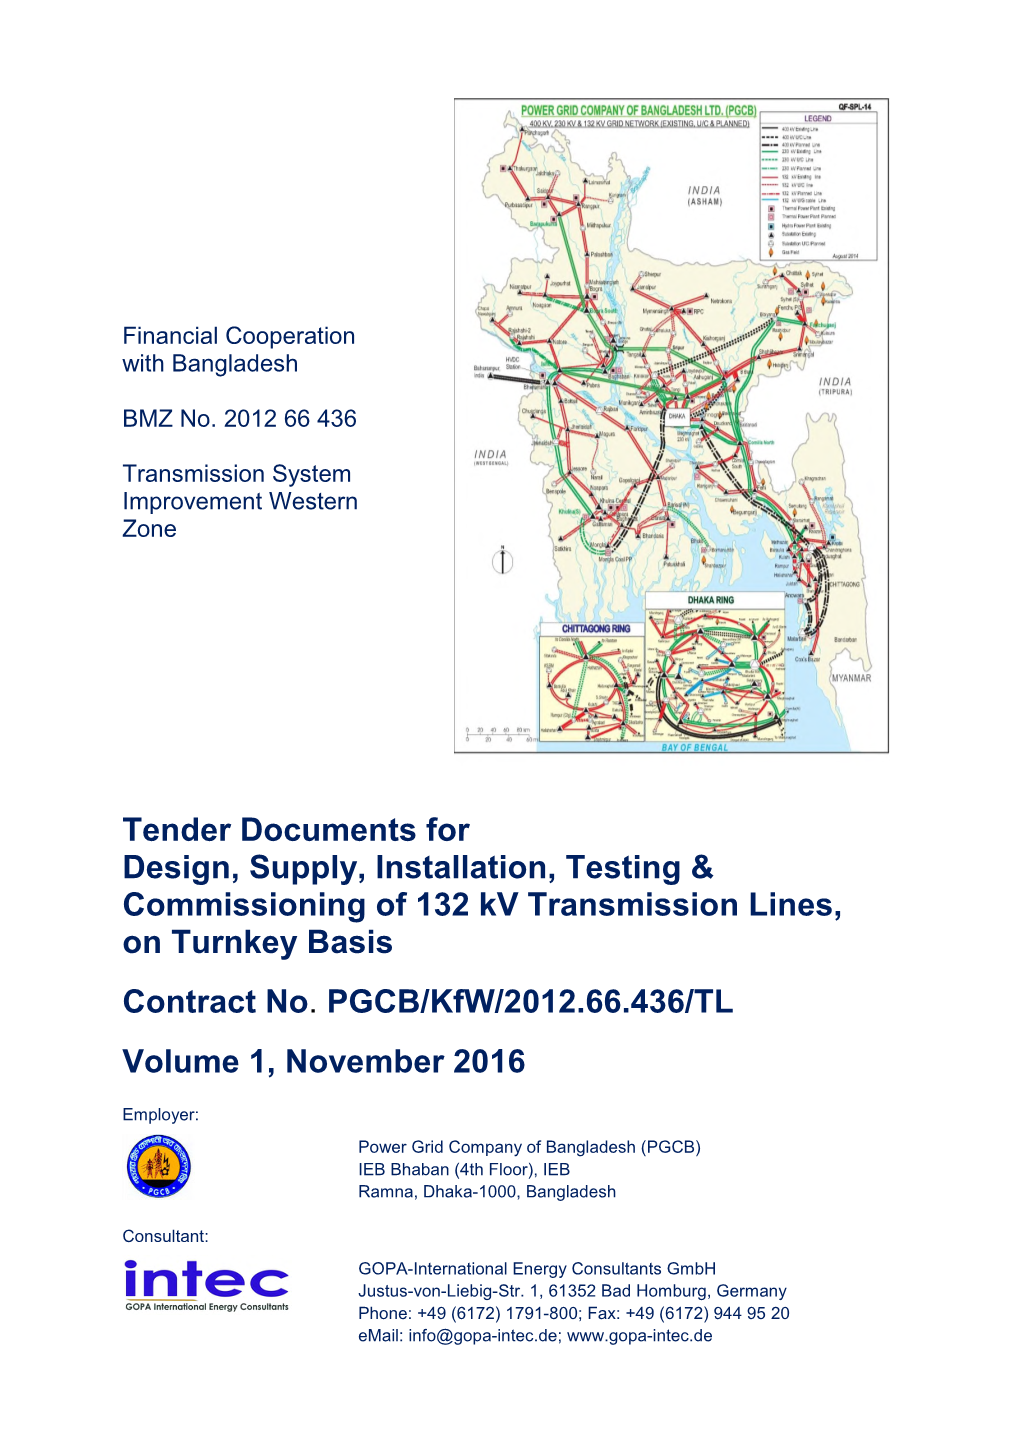 Tender Documents for Design, Supply, Installation, Testing & Commissioning of 132 Kv Transmission Lines, on Turnkey Basis Contract No